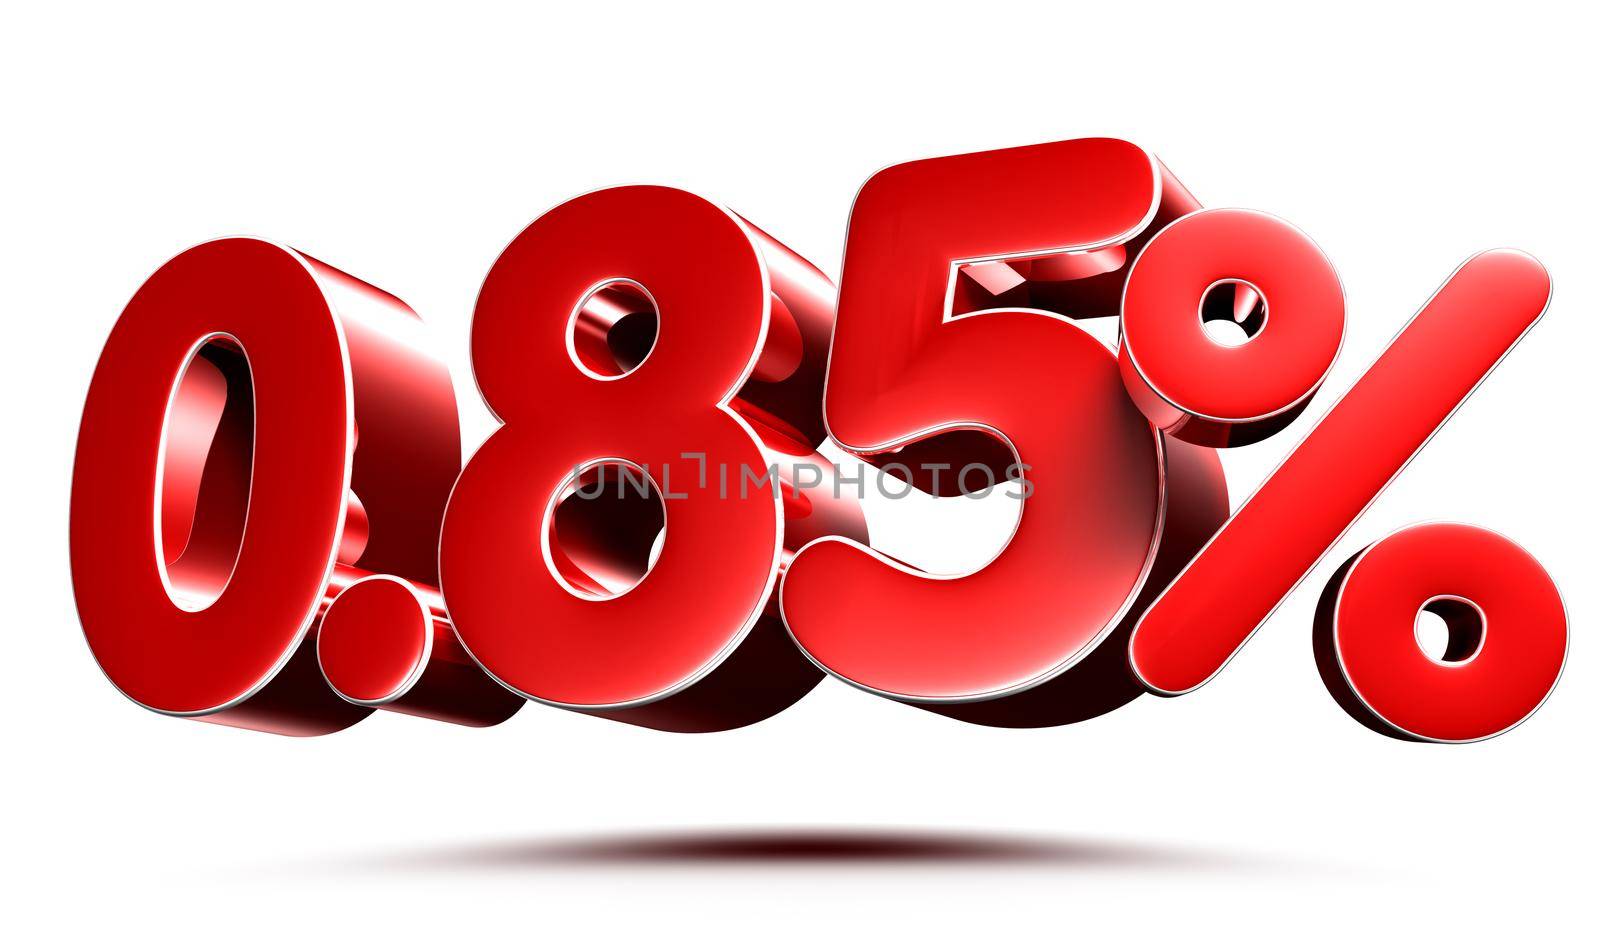 0.85 percent red on white background illustration 3D rendering with clipping path.